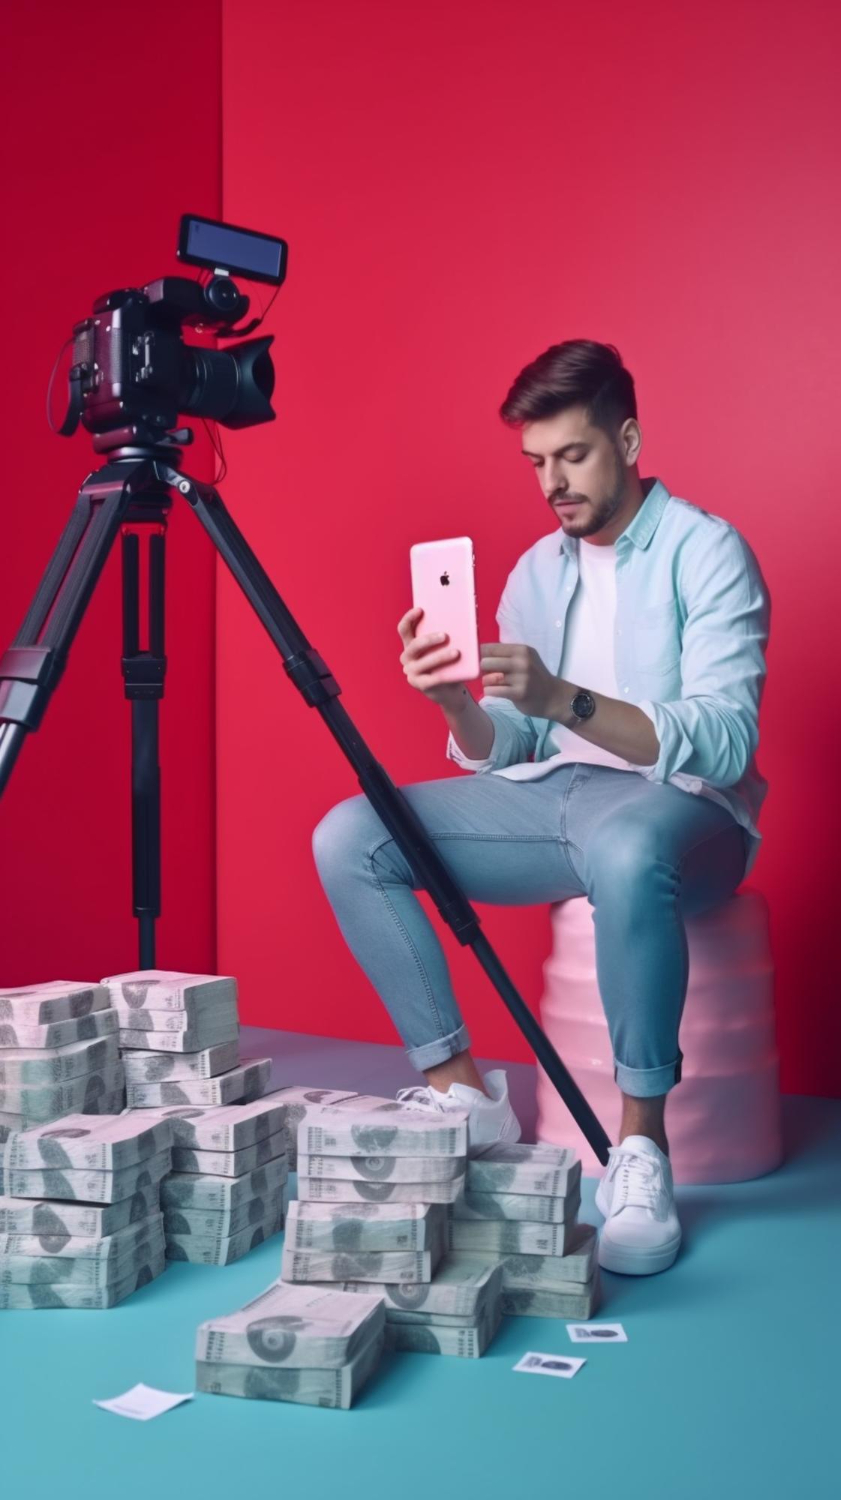 Video ROI Revolution: Turning Views into Revenue for Your Brand